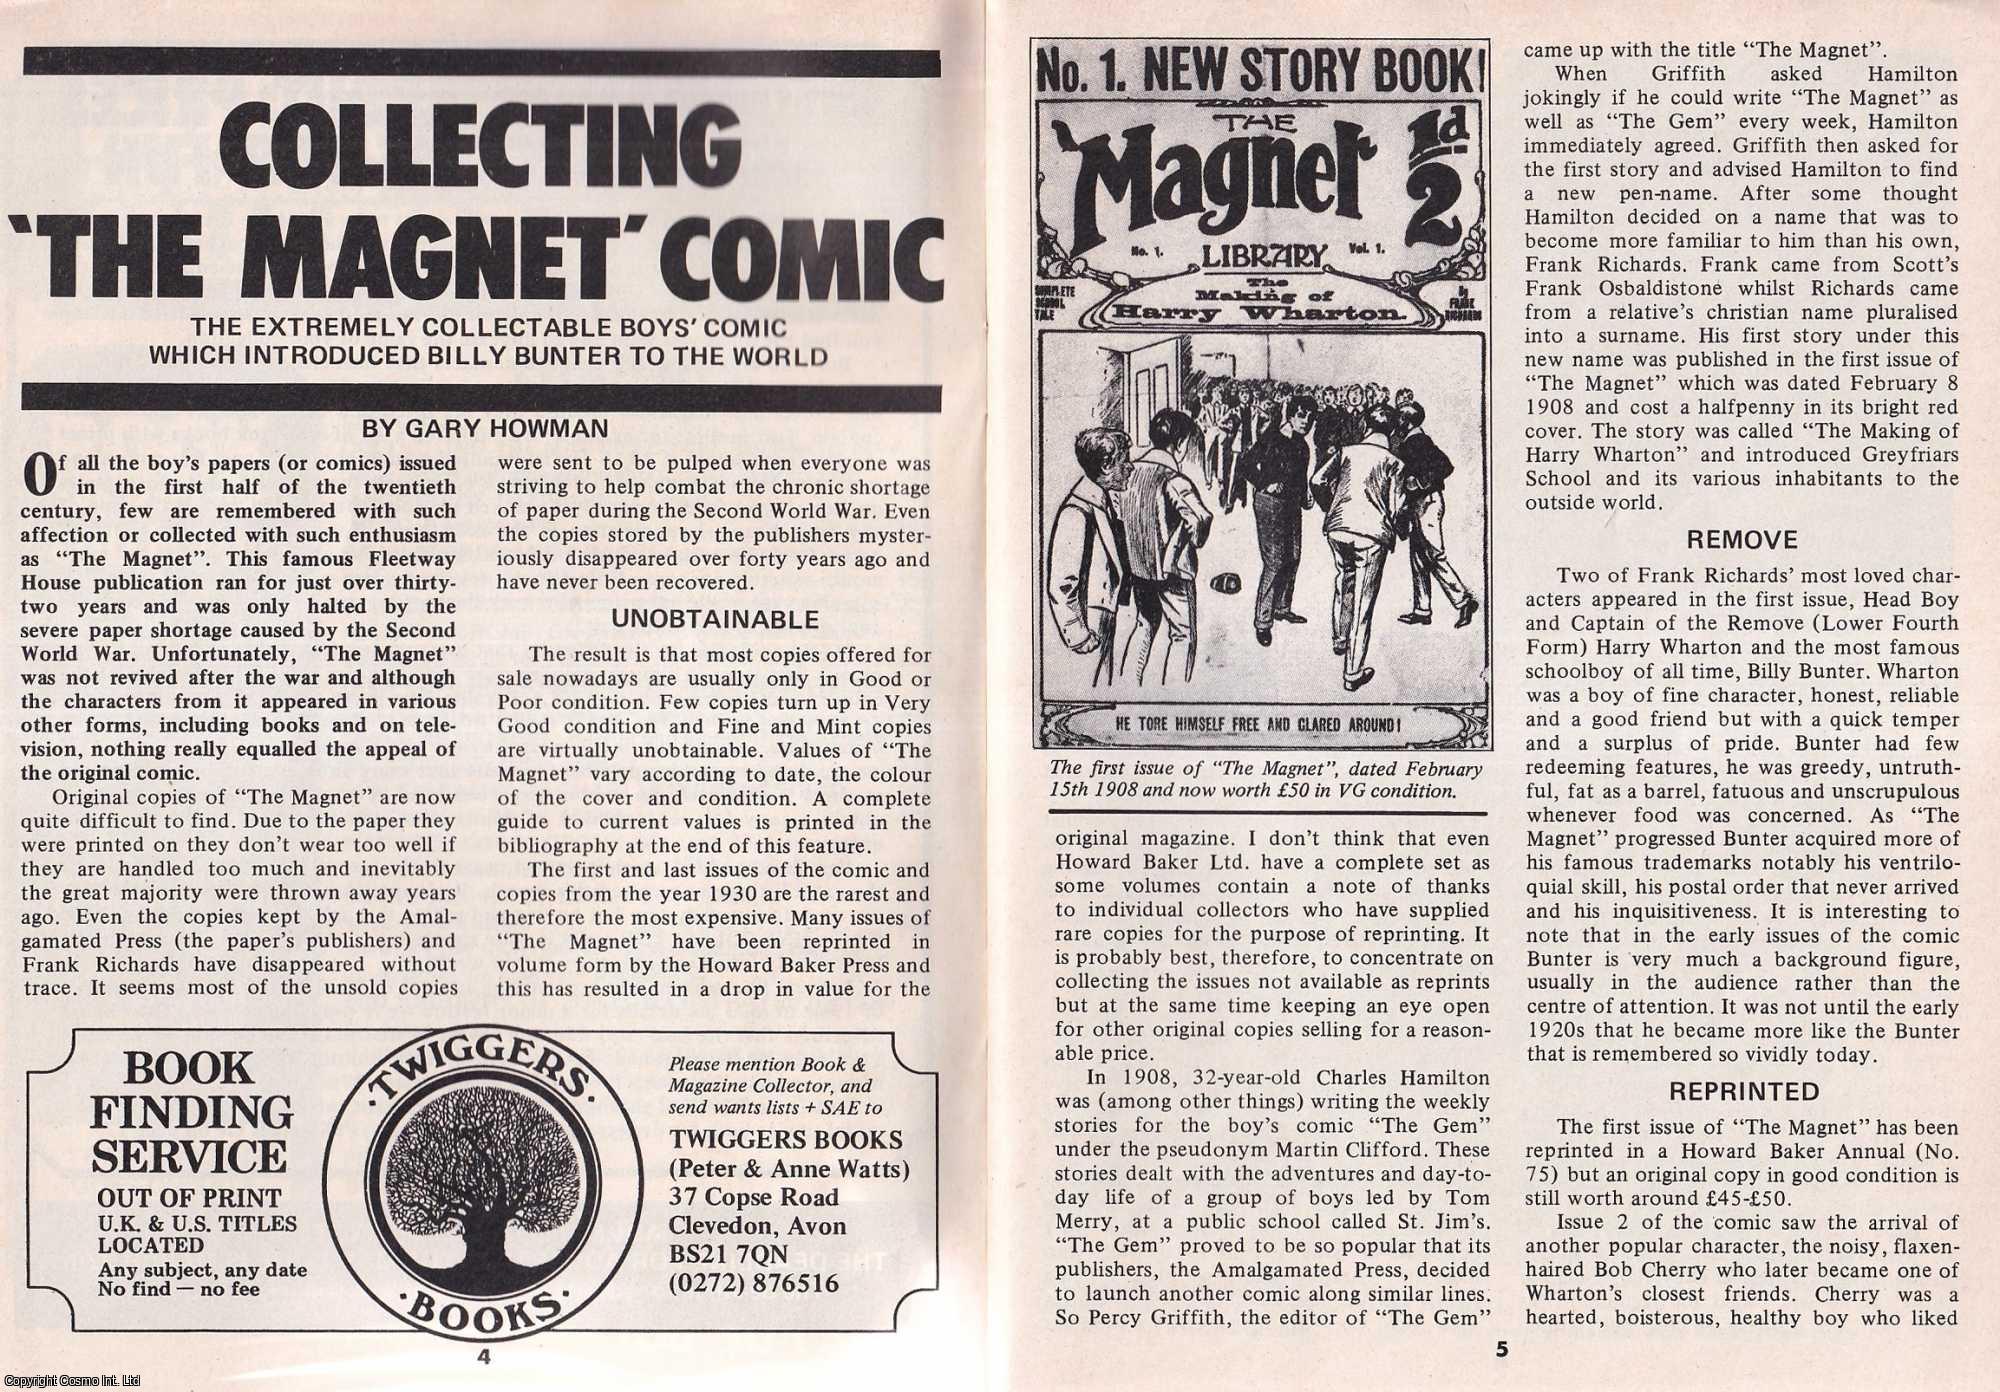 Gary Howman - Collecting The Magnet Comic : The Extremely Collectable Boys Comic which Introduced Billy Bunter to The World. This is an original article separated from an issue of The Book & Magazine Collector publication, 1984.